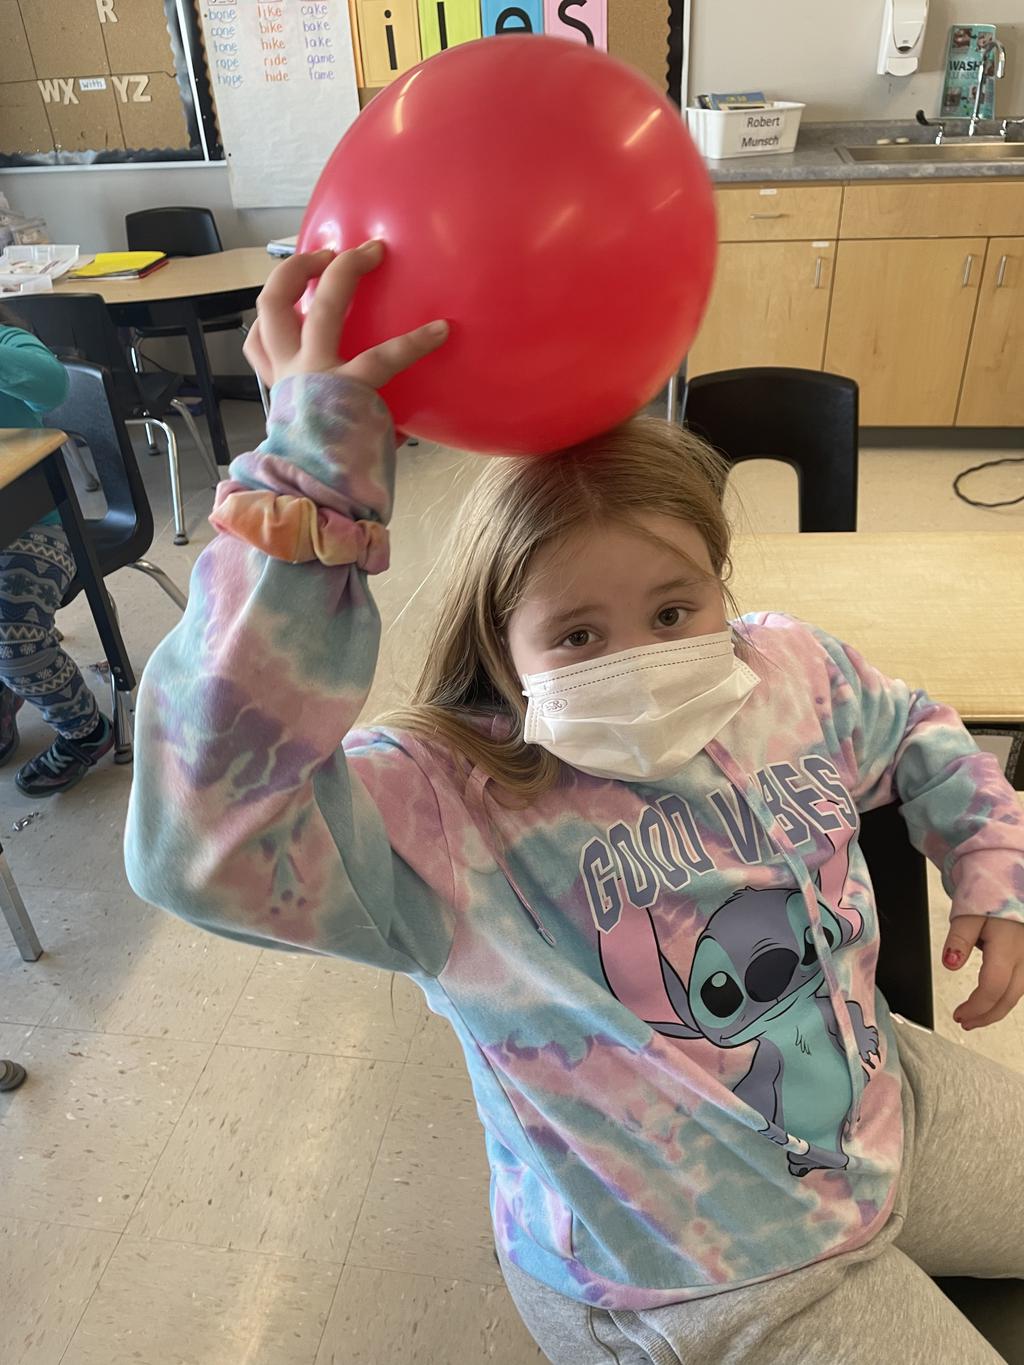 Student testing static electricity on her hair with a balloon